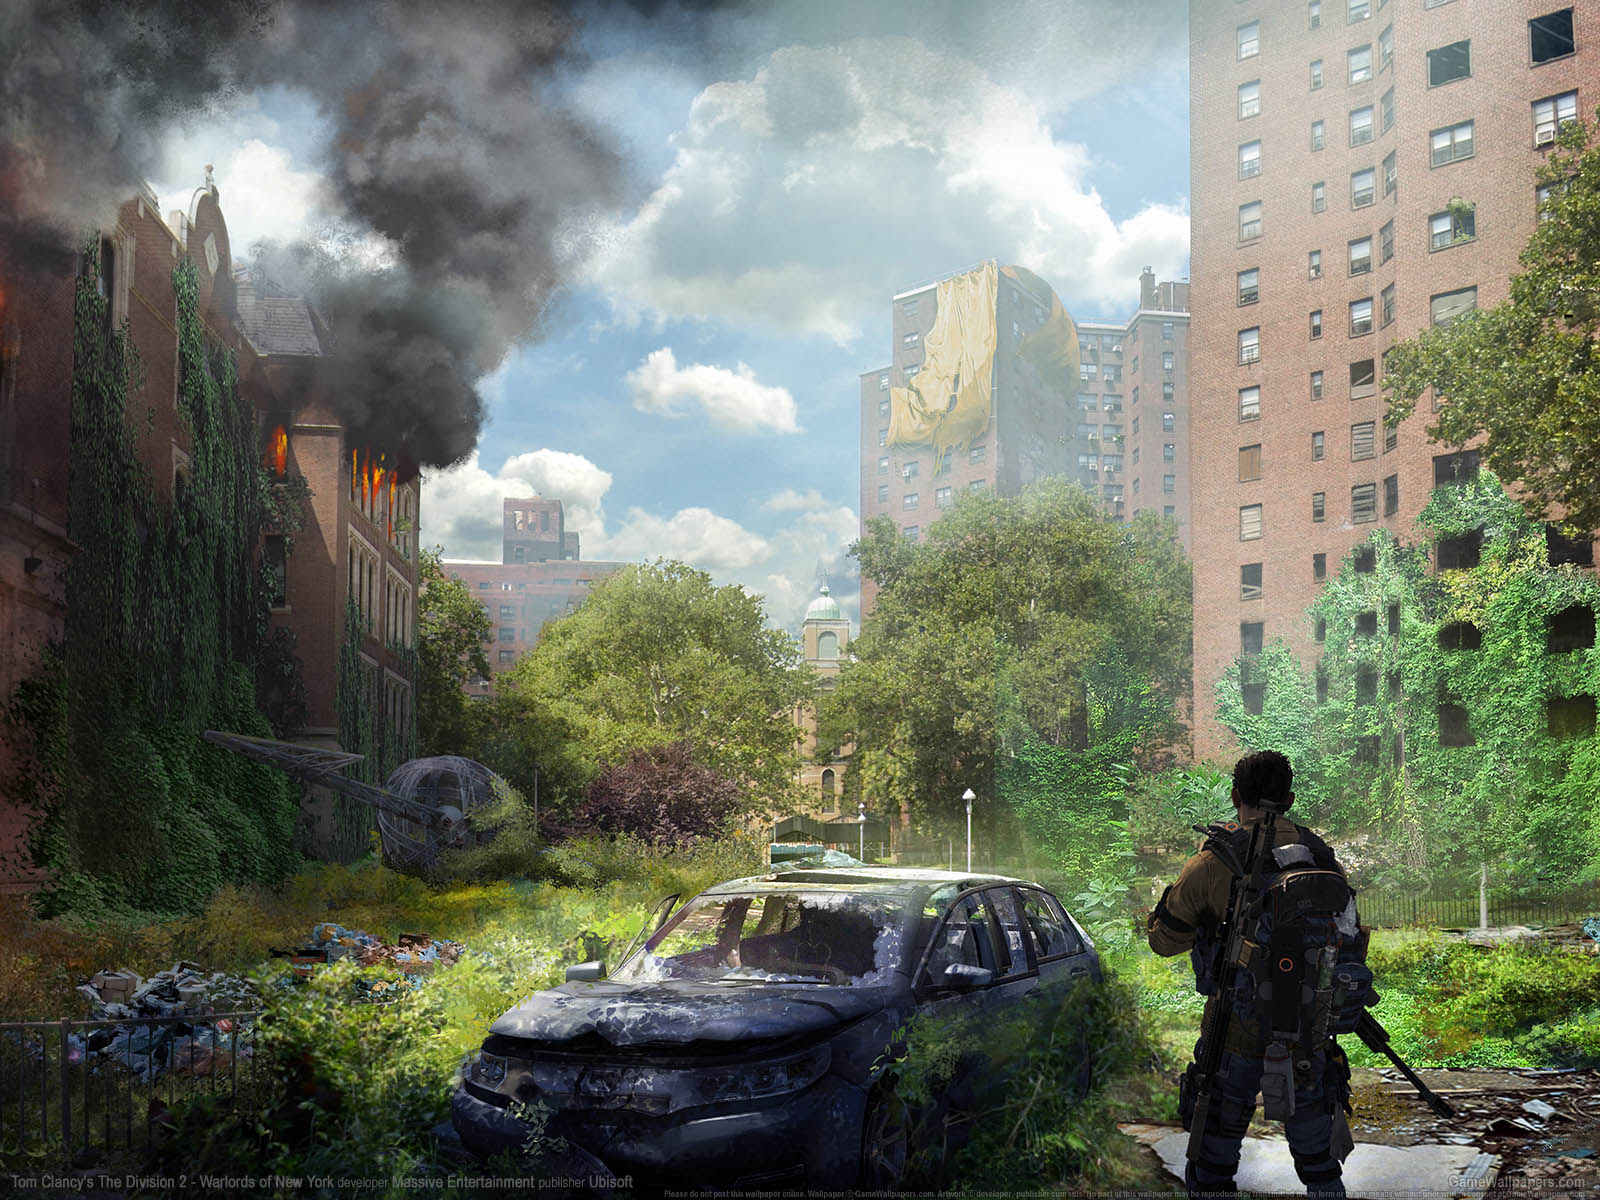 Tom Clancy%25255C%252527s The Division 2 - Warlords of New York fond d'cran 03 1600x1200